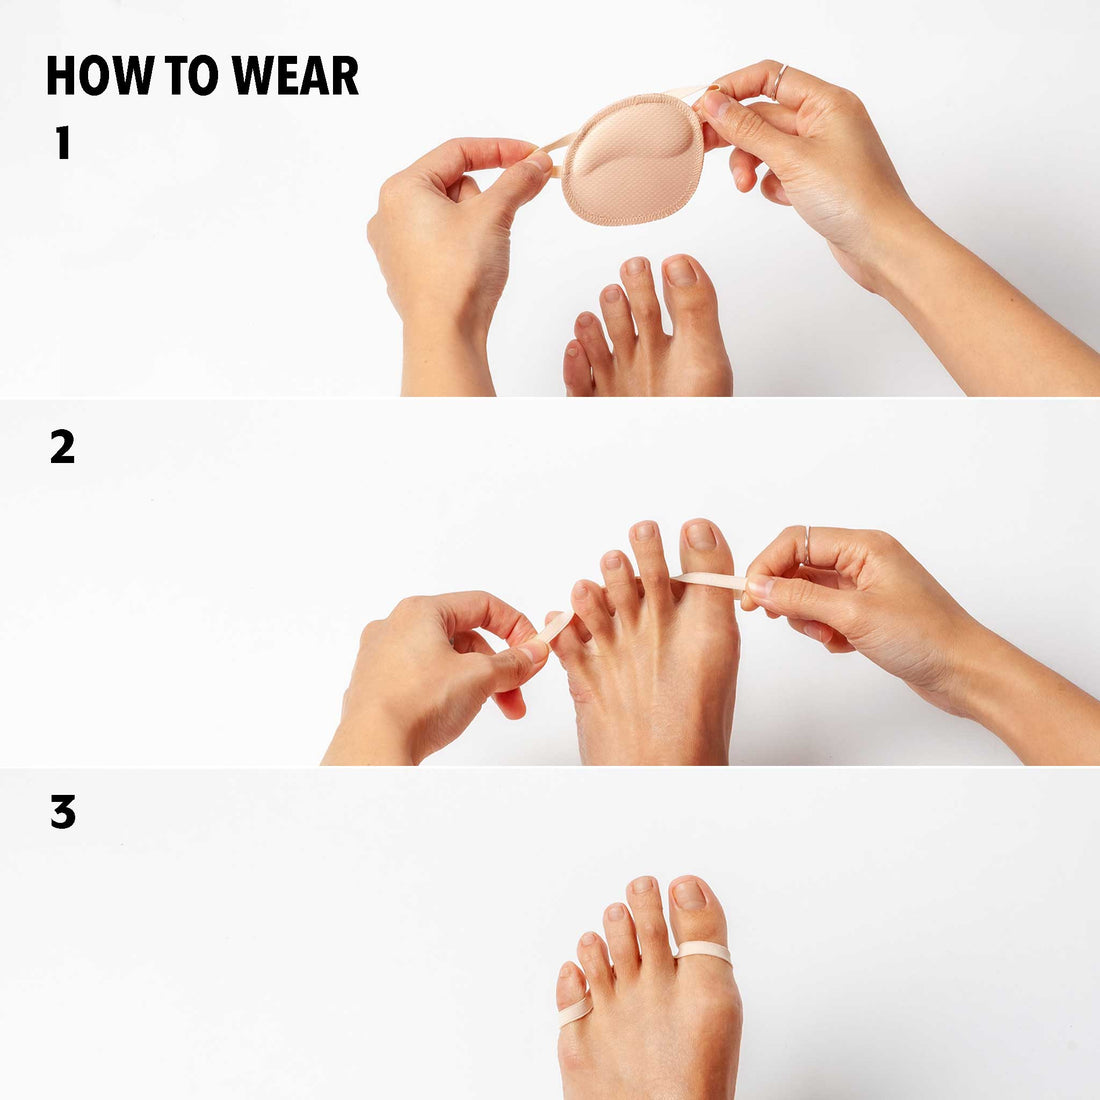 Small elastic straps wrap around big toe and pinky toe to keep the Sockshion in place. They are small enough to still remain hidden in most shoes.